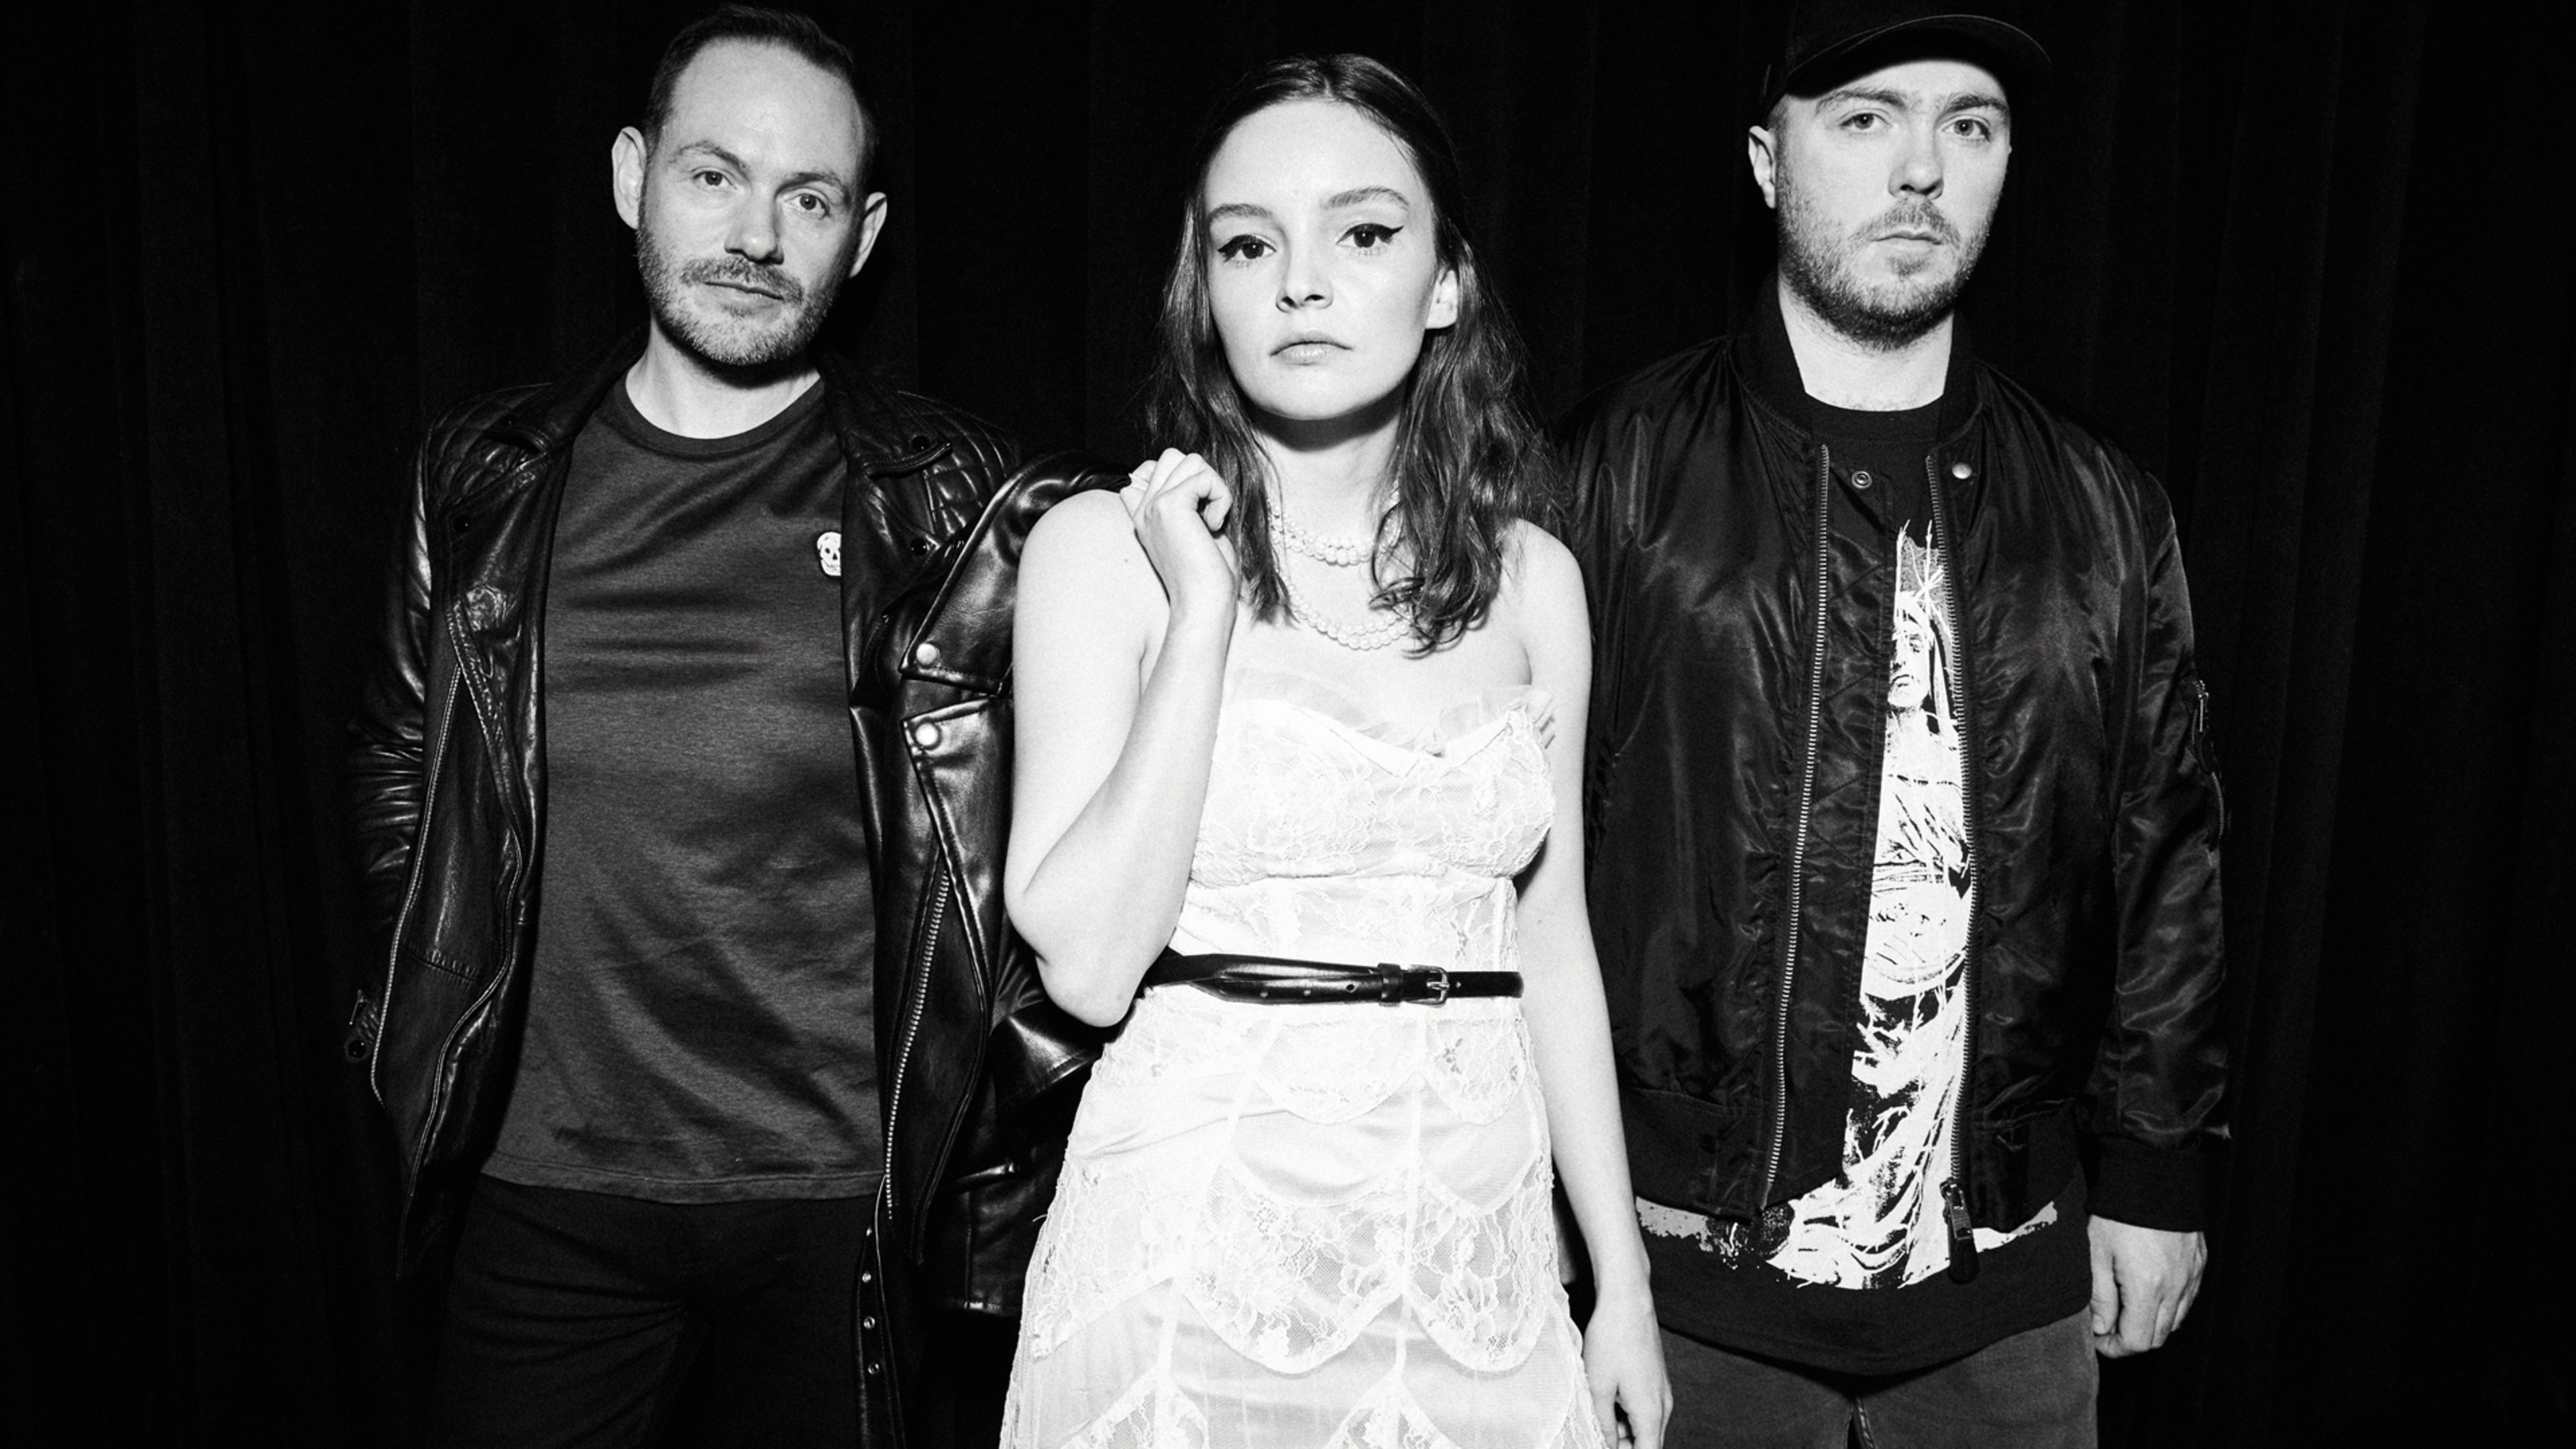 Chatting with Chvrches about creativity: “Don’t pussyfoot around”